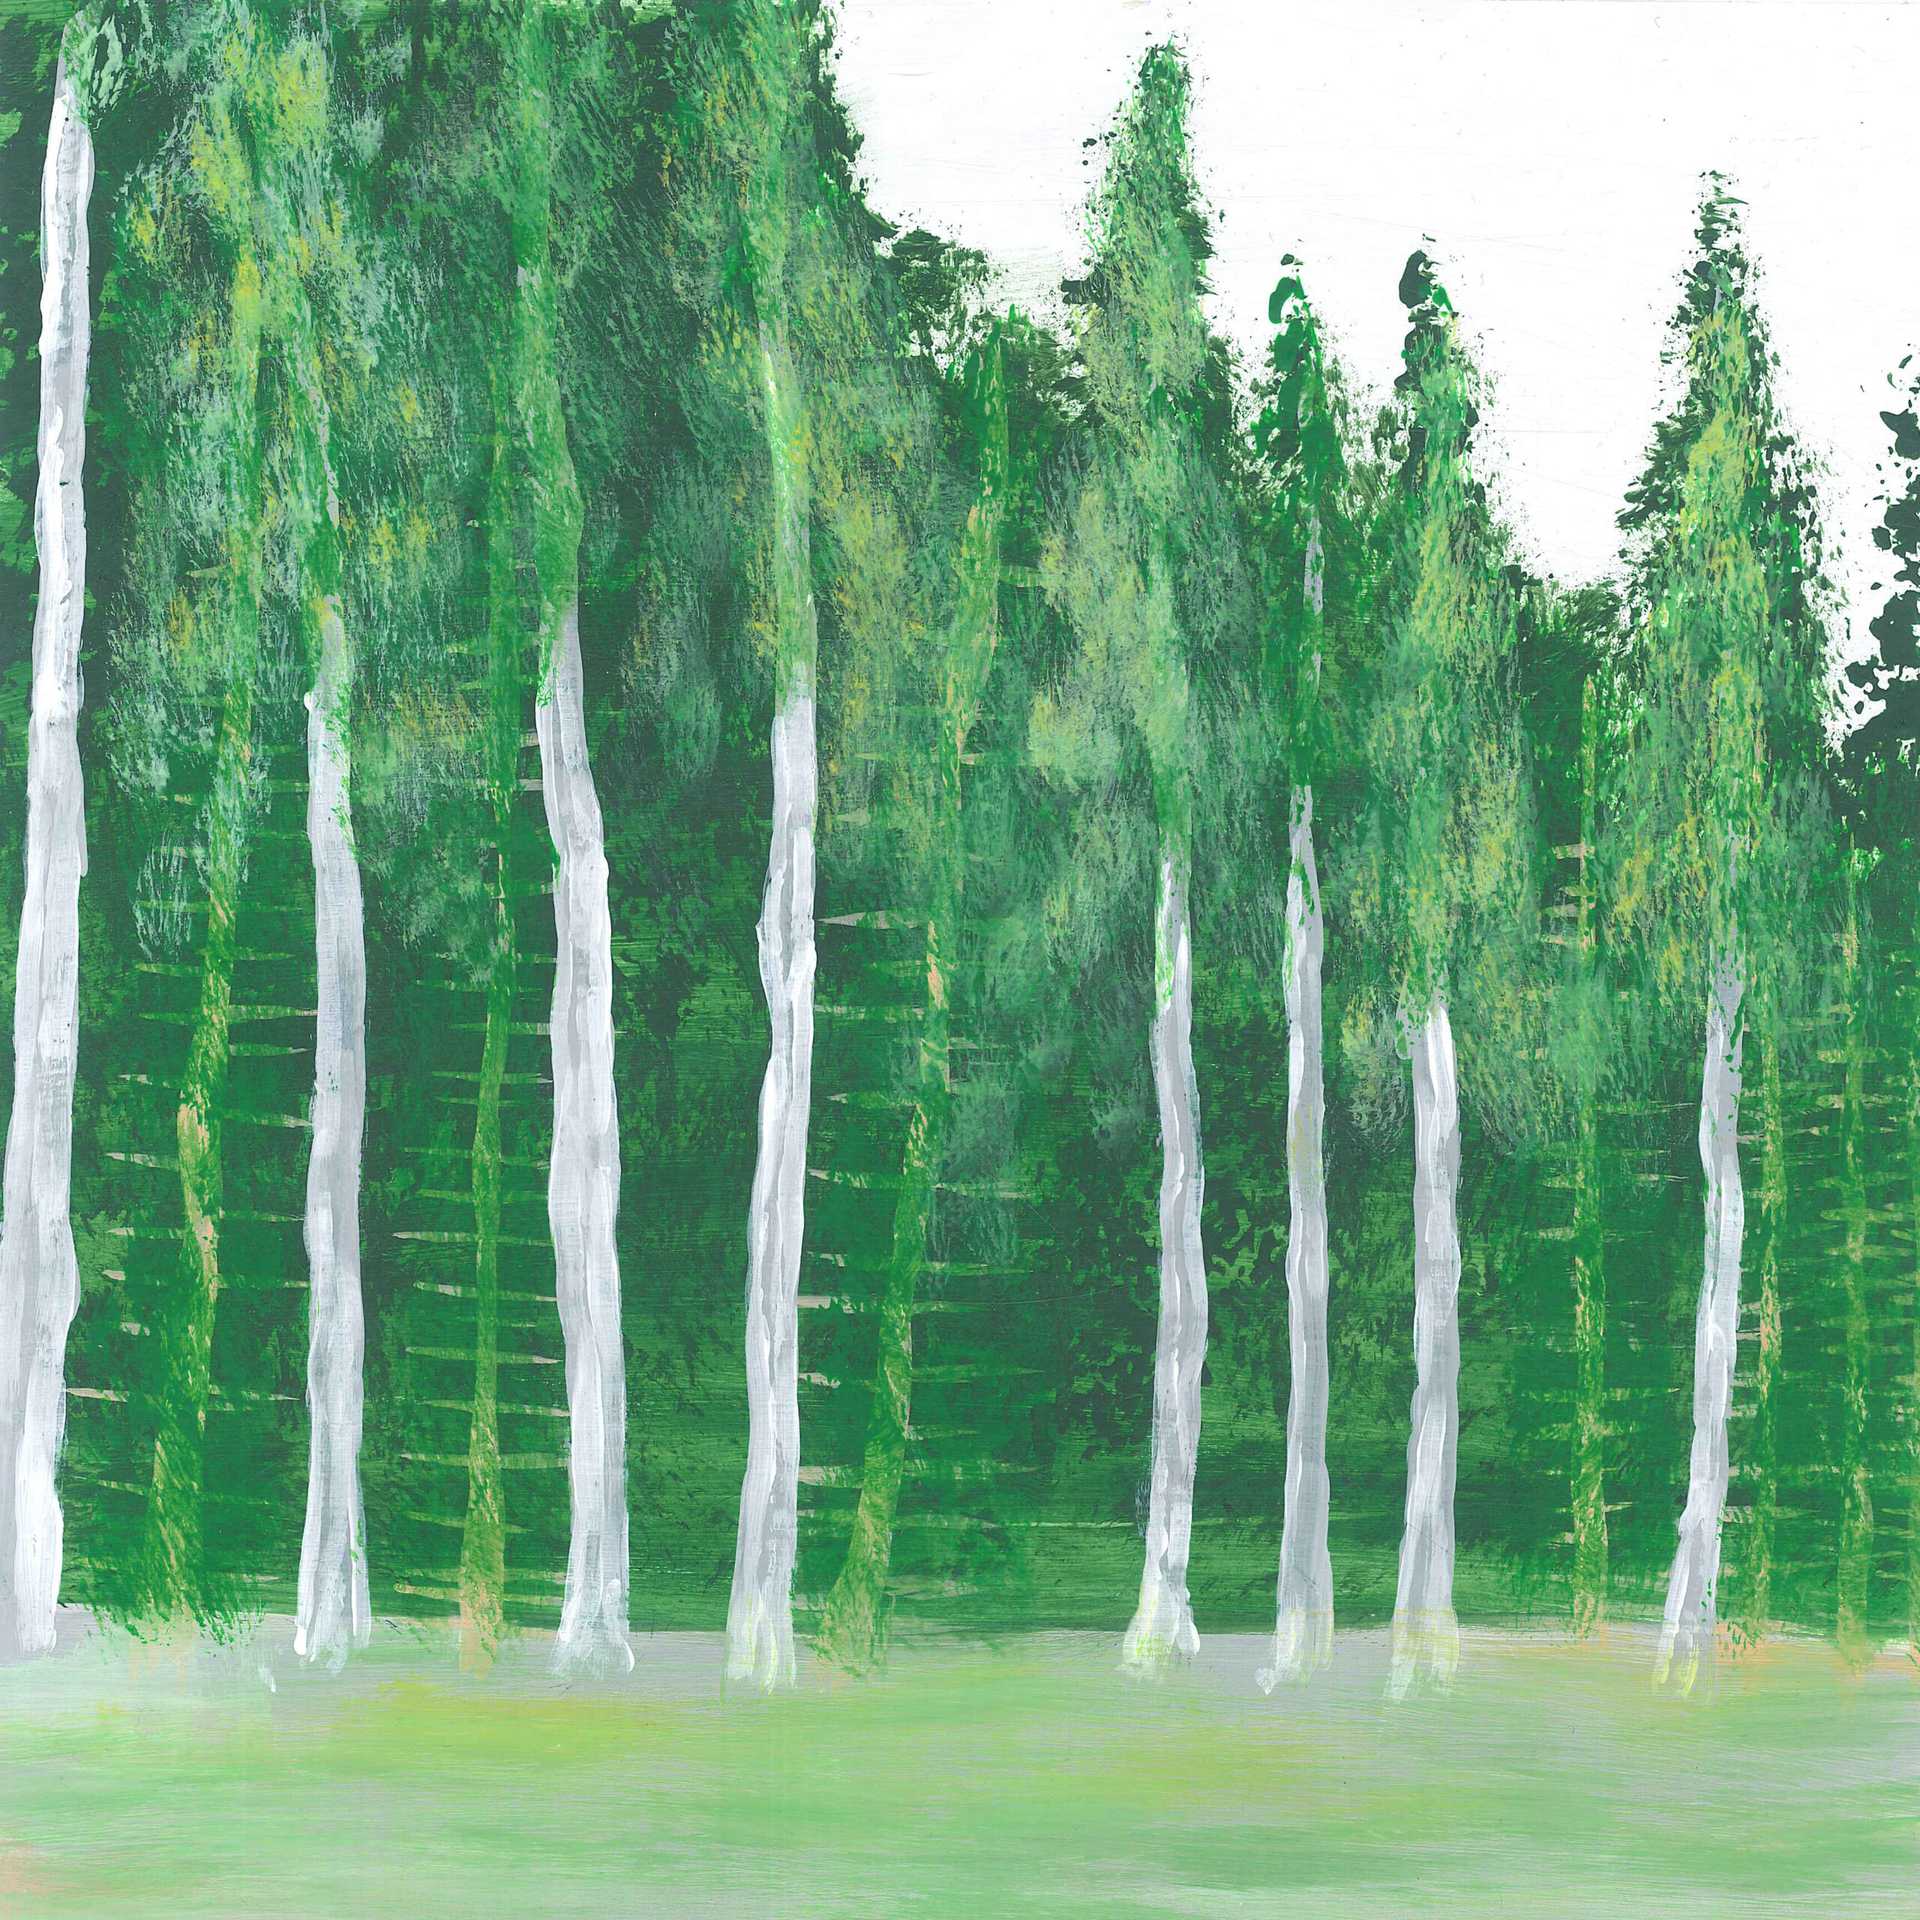 Storm in Conifer Forest - nature landscape painting - earth.fm